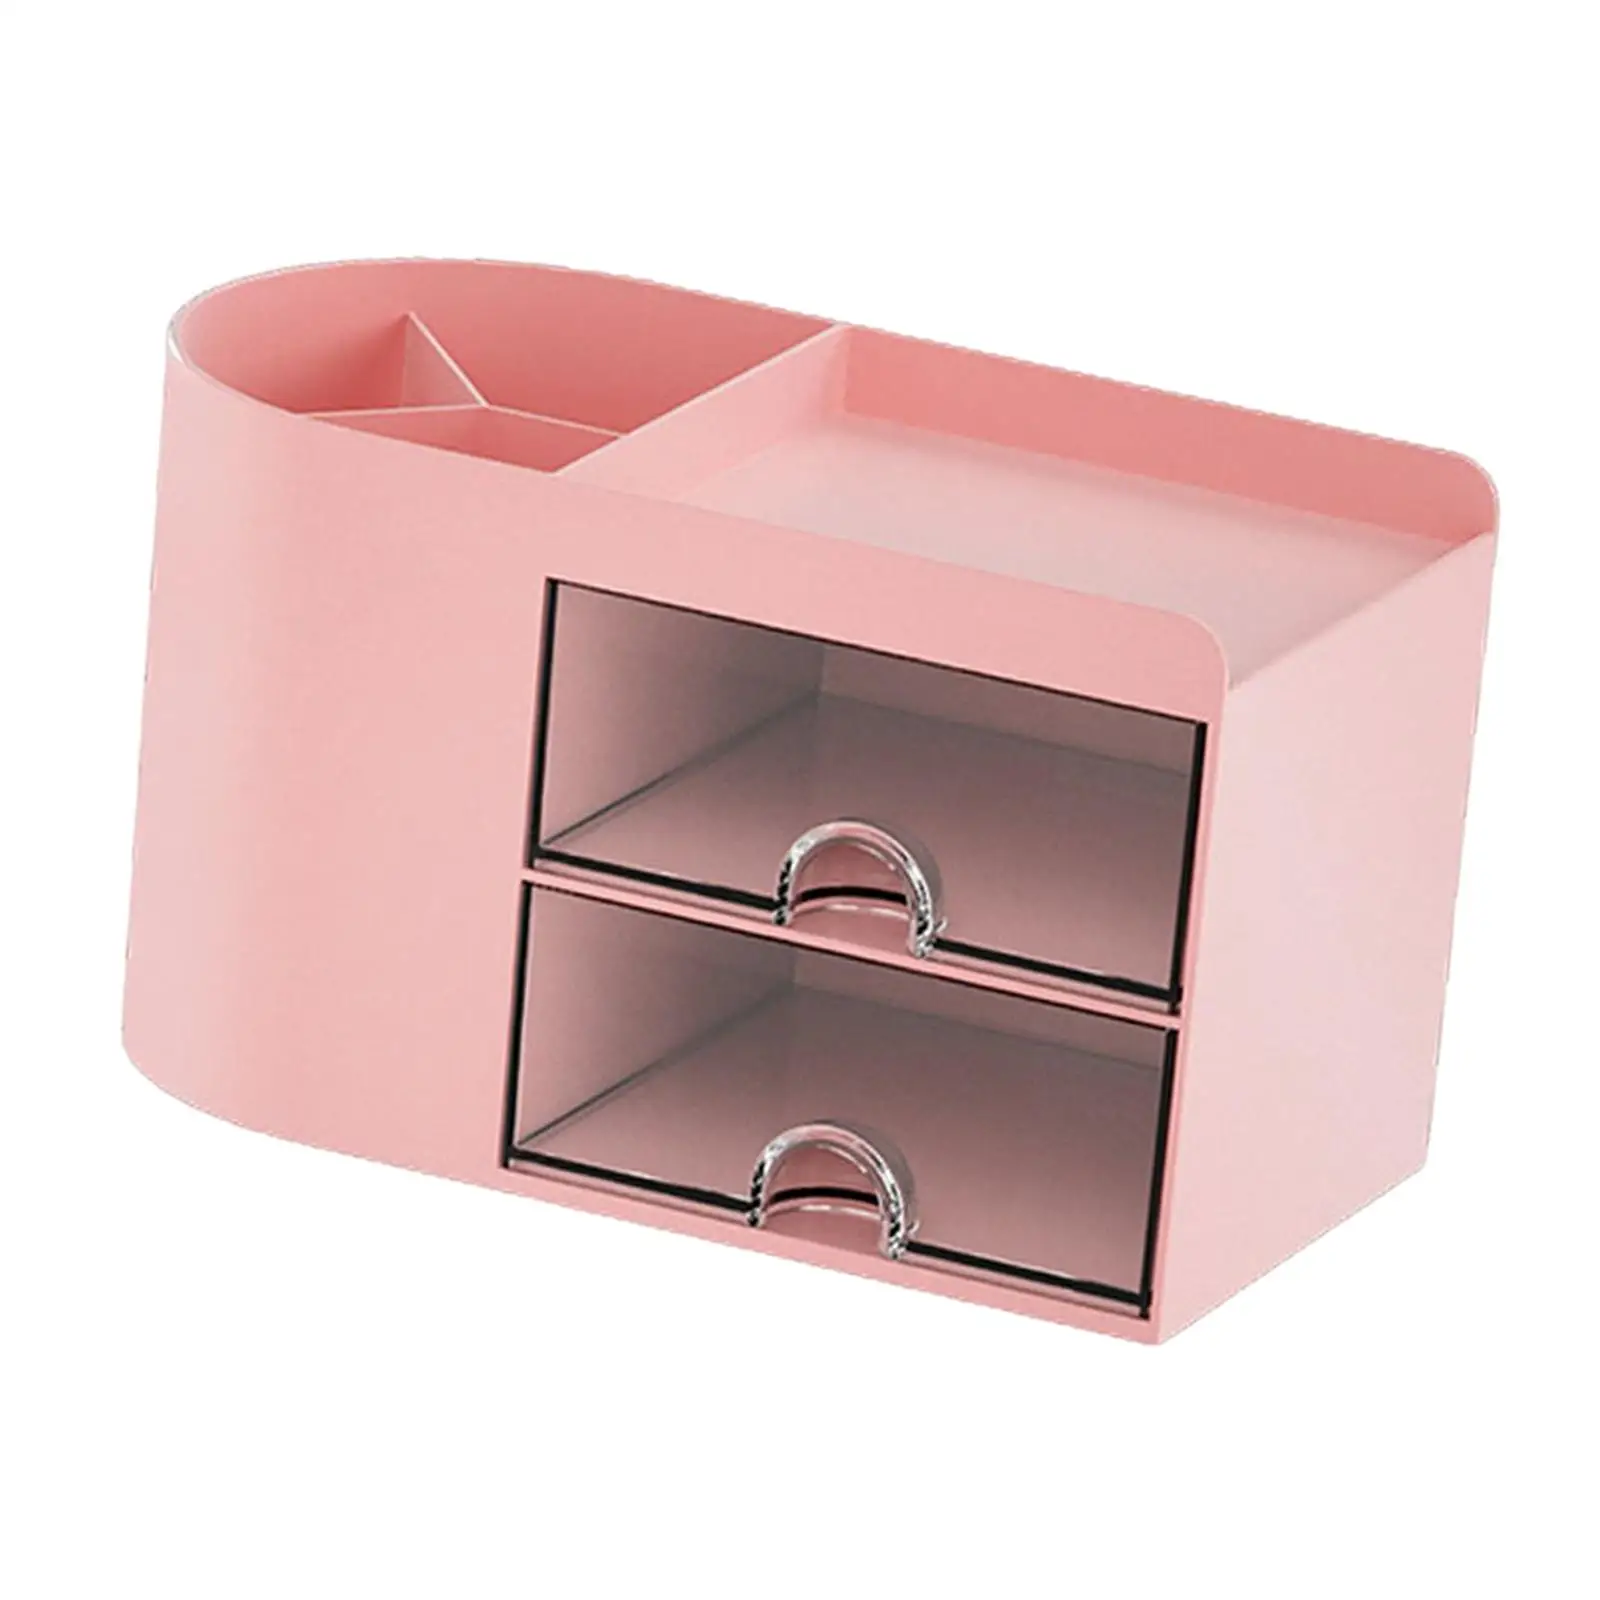 for Smartphone and Other Small Items Makeup Storage Drawer with Drawers Pen Holder Office Desk Organizer for Dresser Drawers